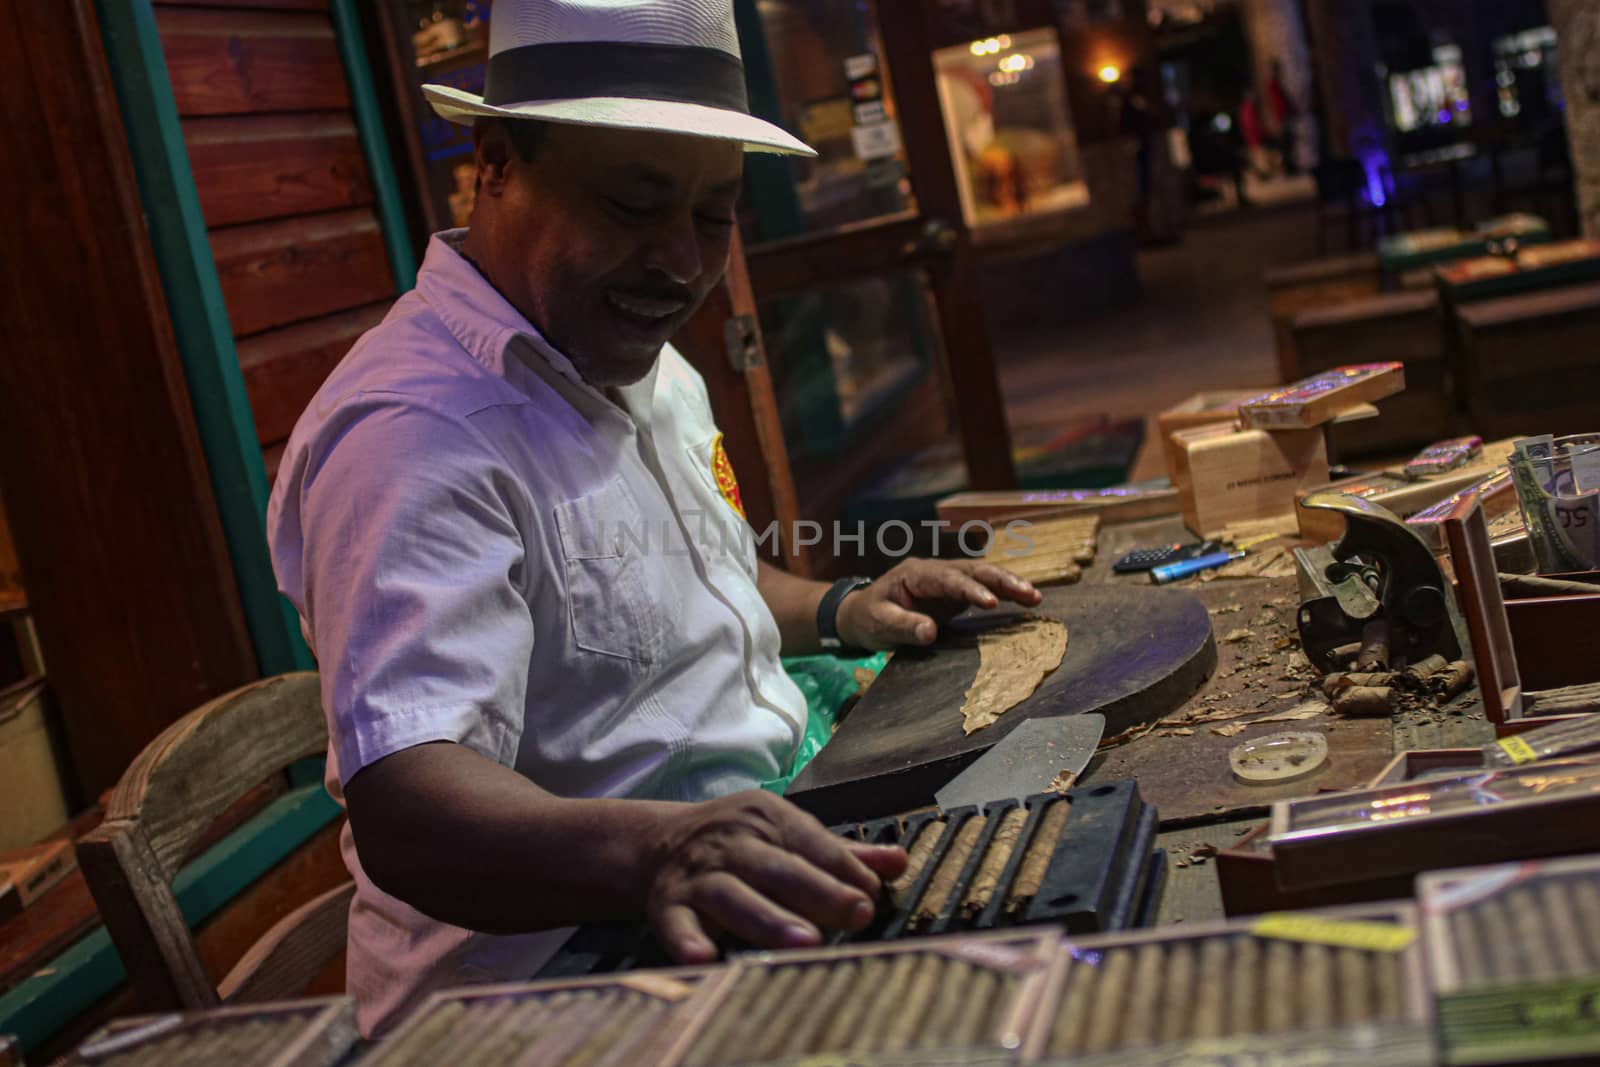 Craft production of Dominican cigars 2 by pippocarlot